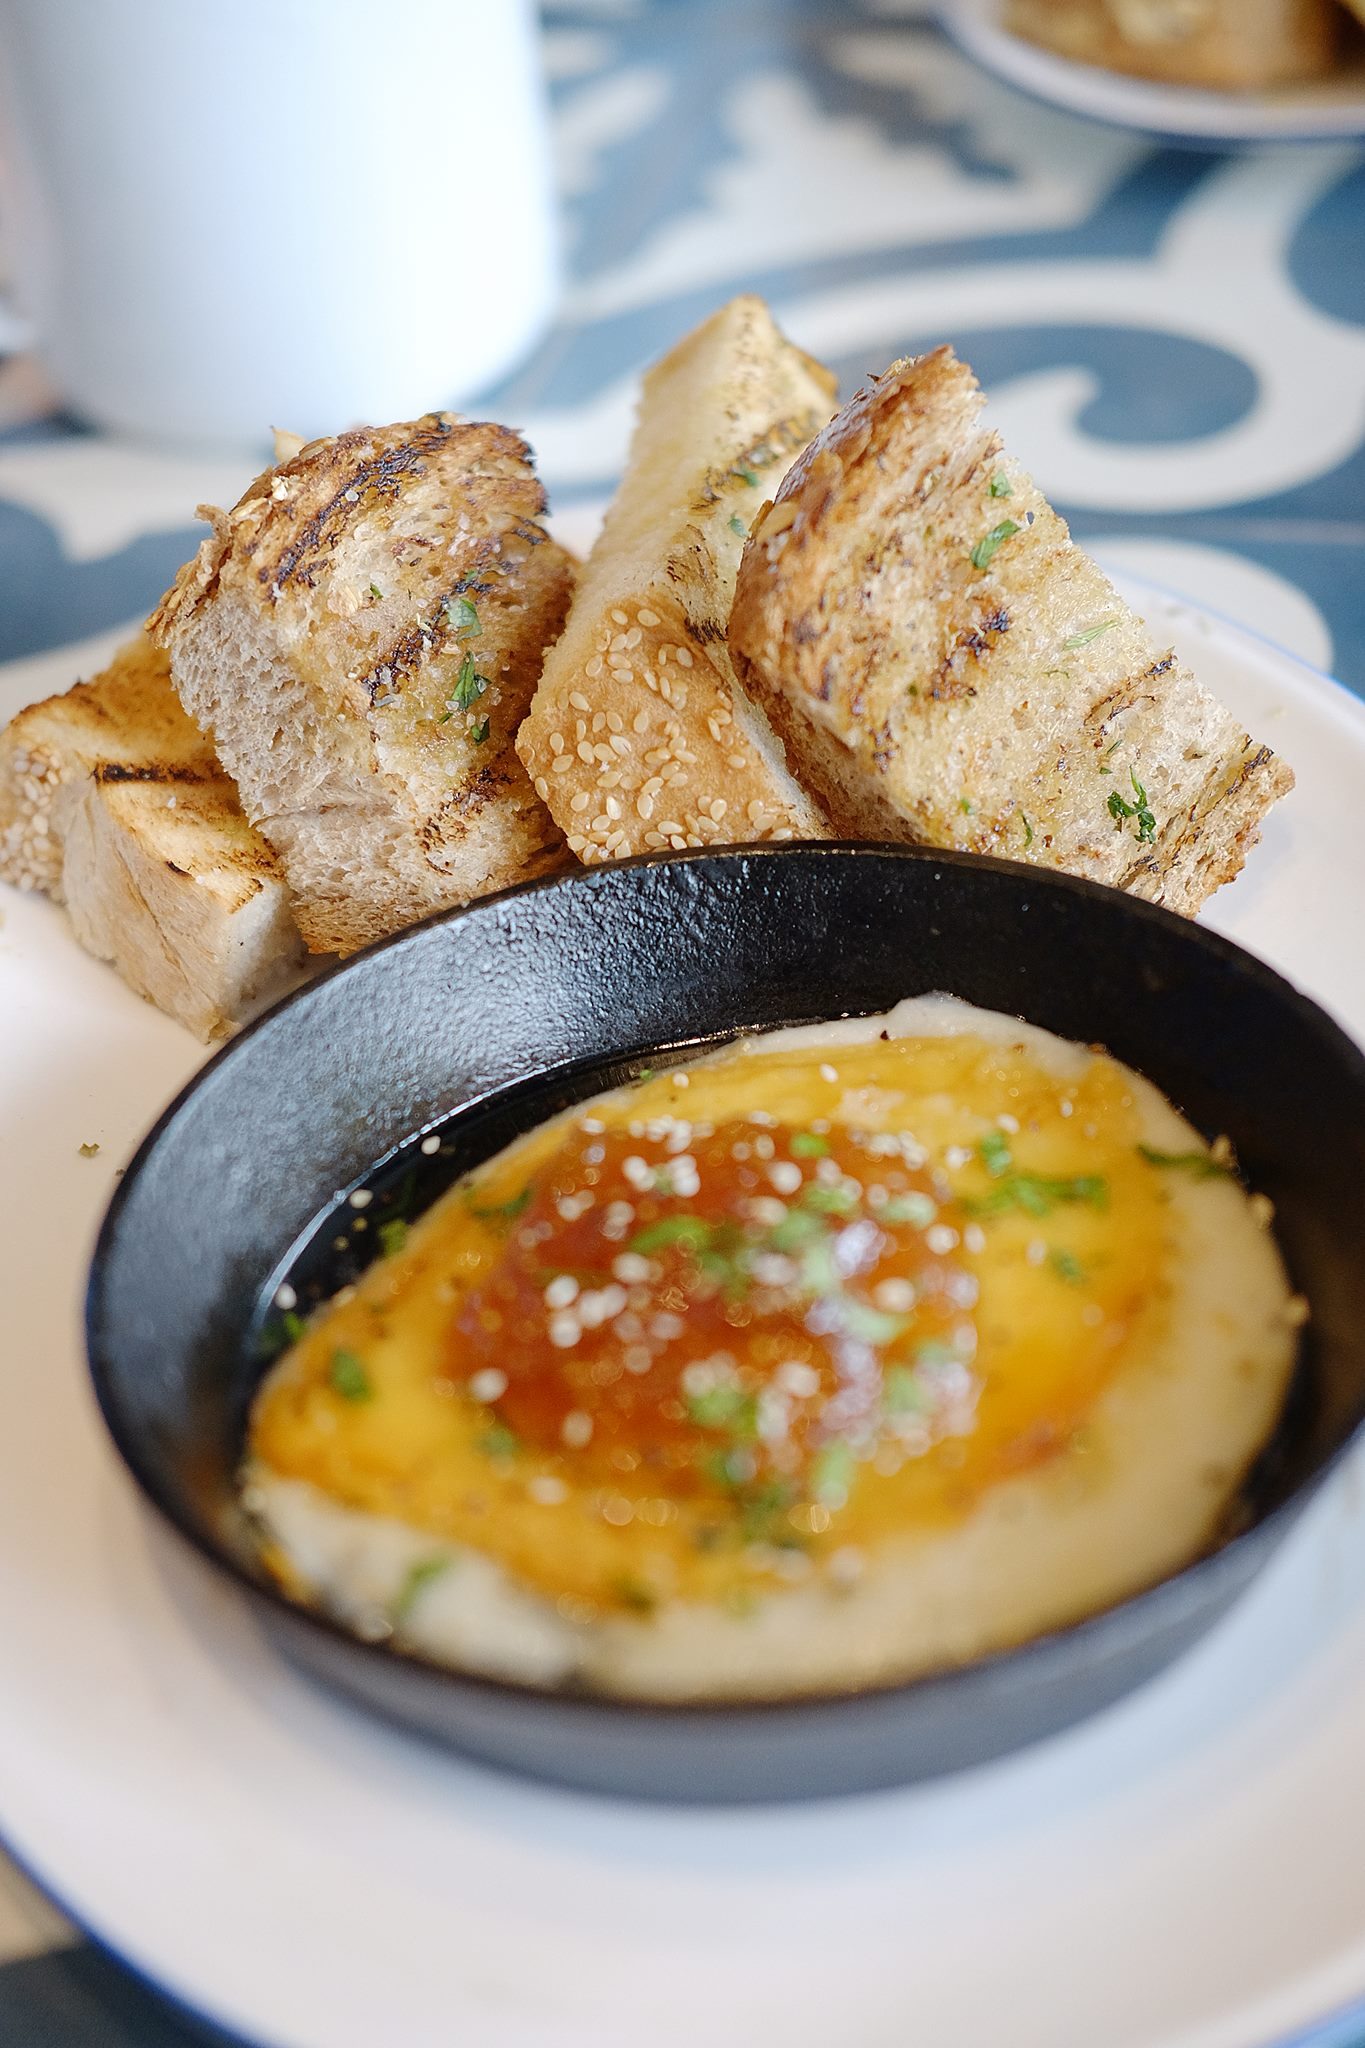 SAGANAKI. This starter strikes the perfect balance between salty and sweet. Photo courtesy of Souv 